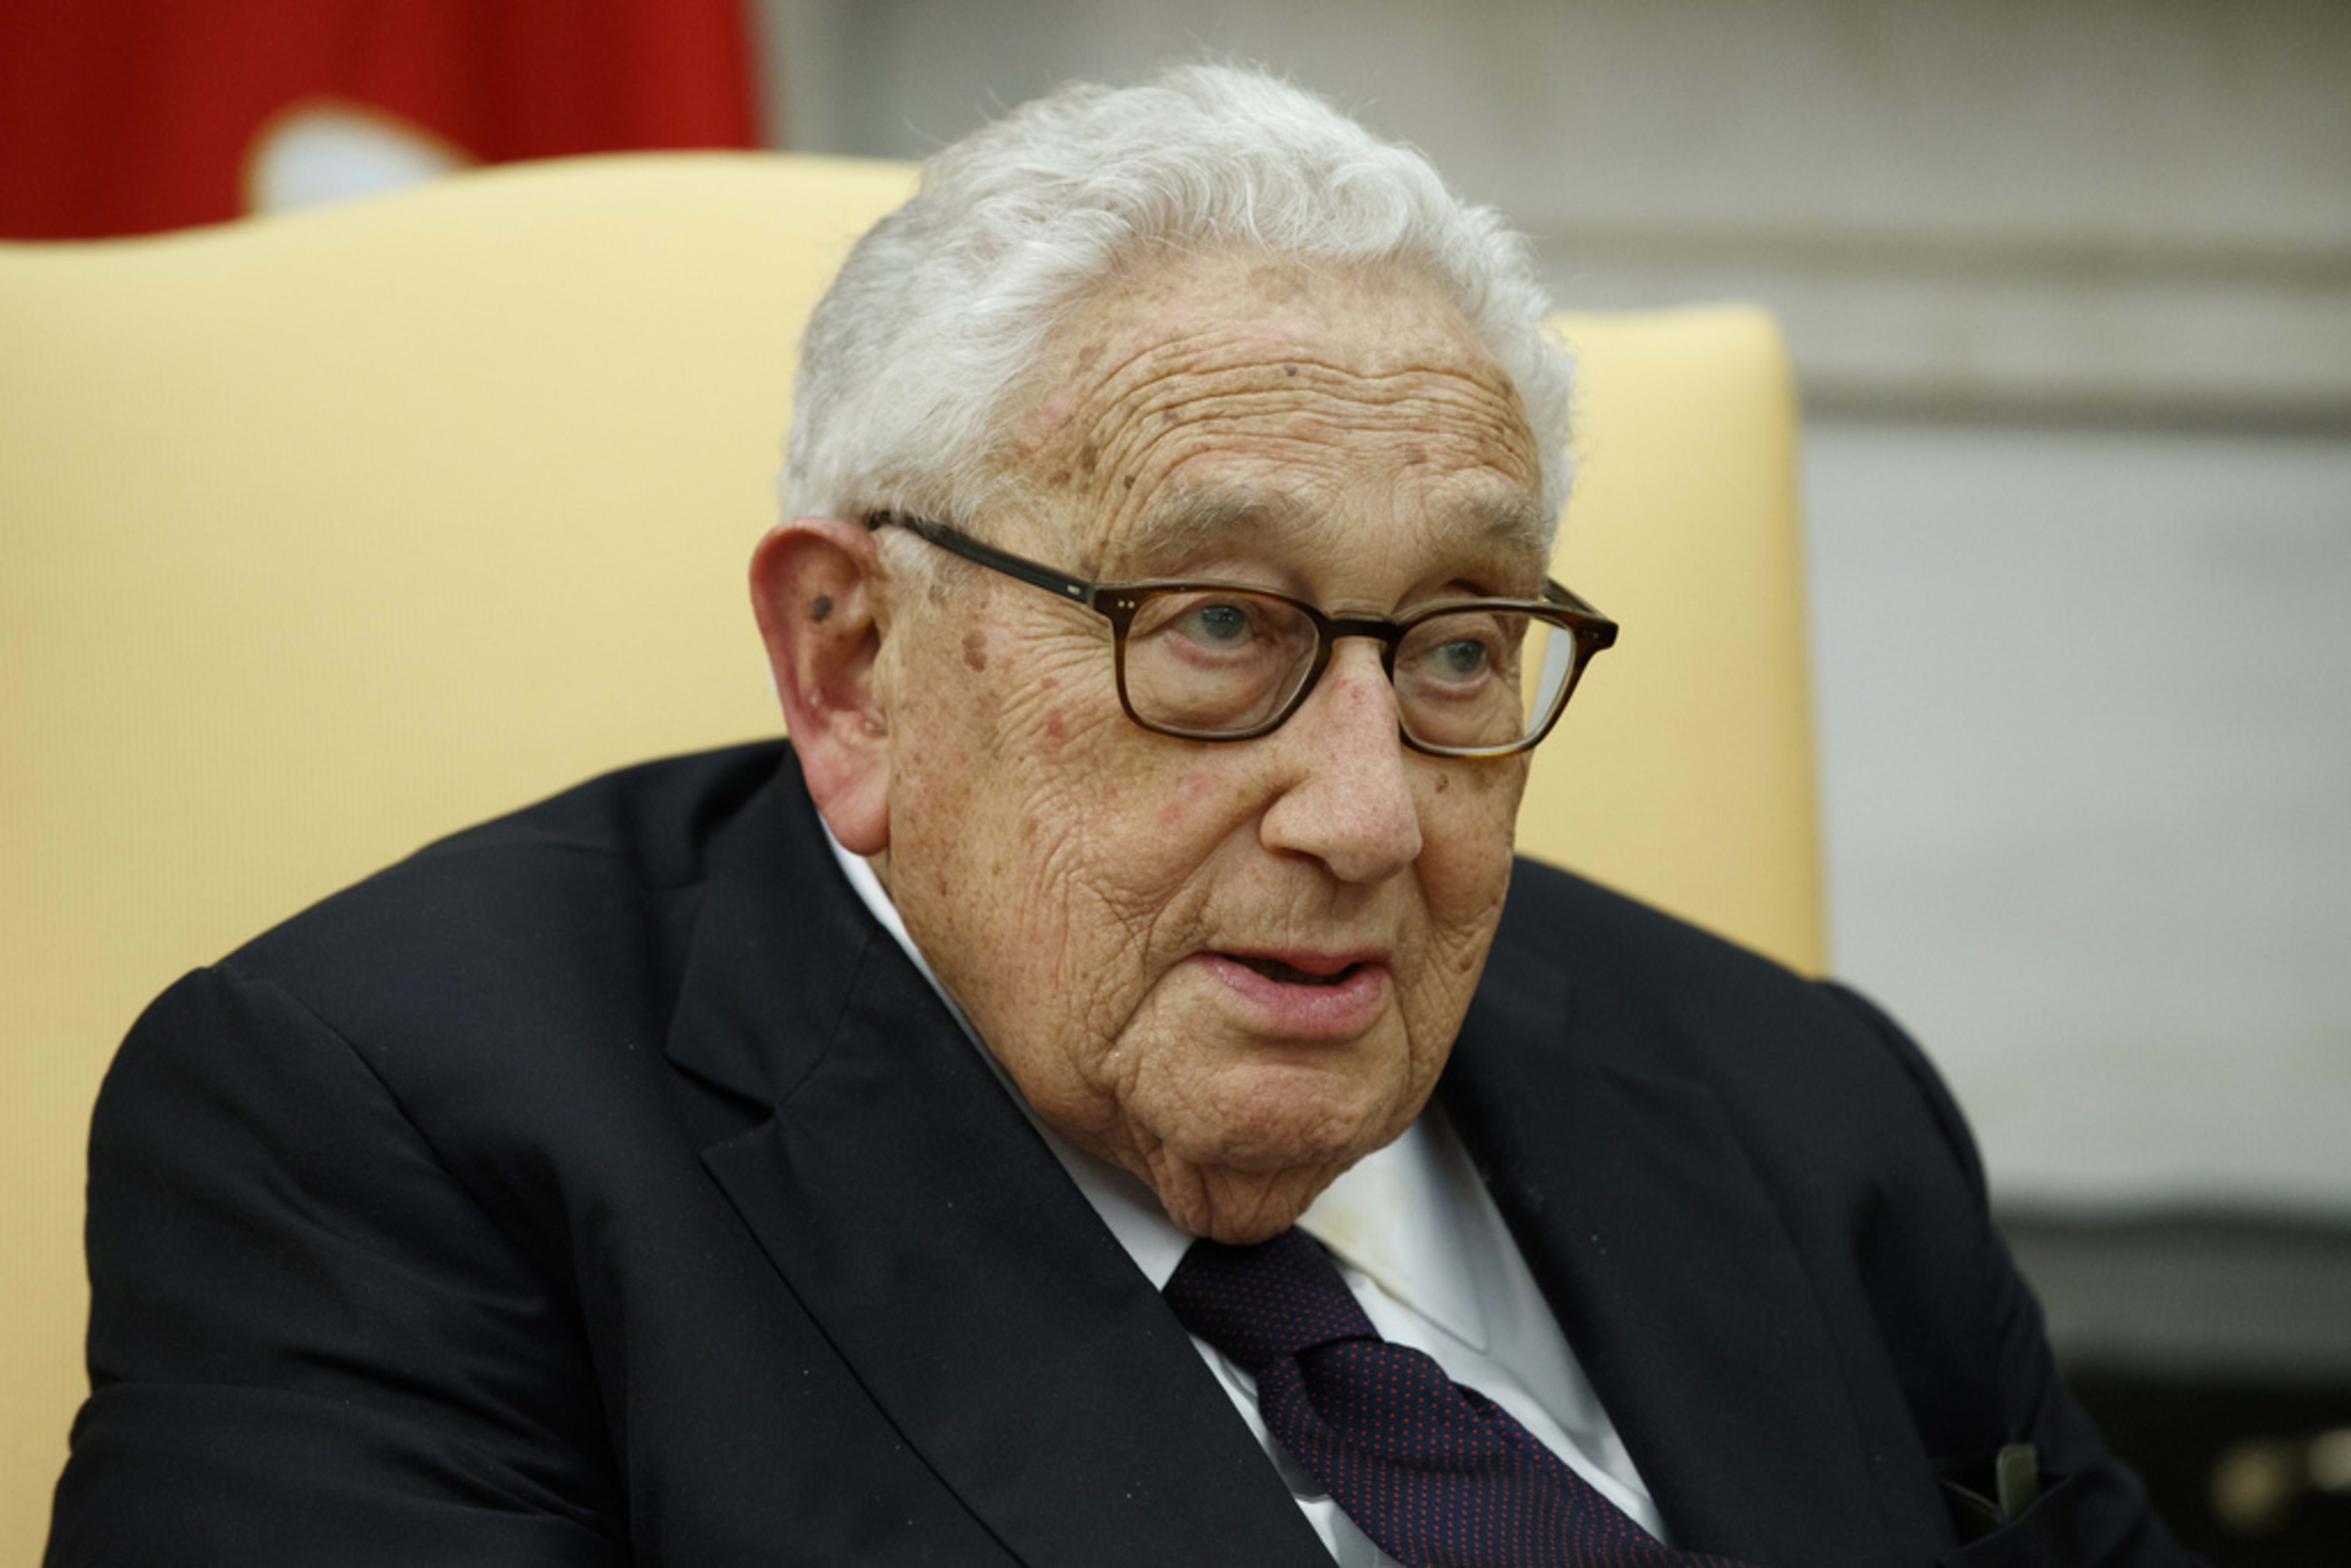 Henry Kissinger dies: Here’s why the former secretary of state was so controversial